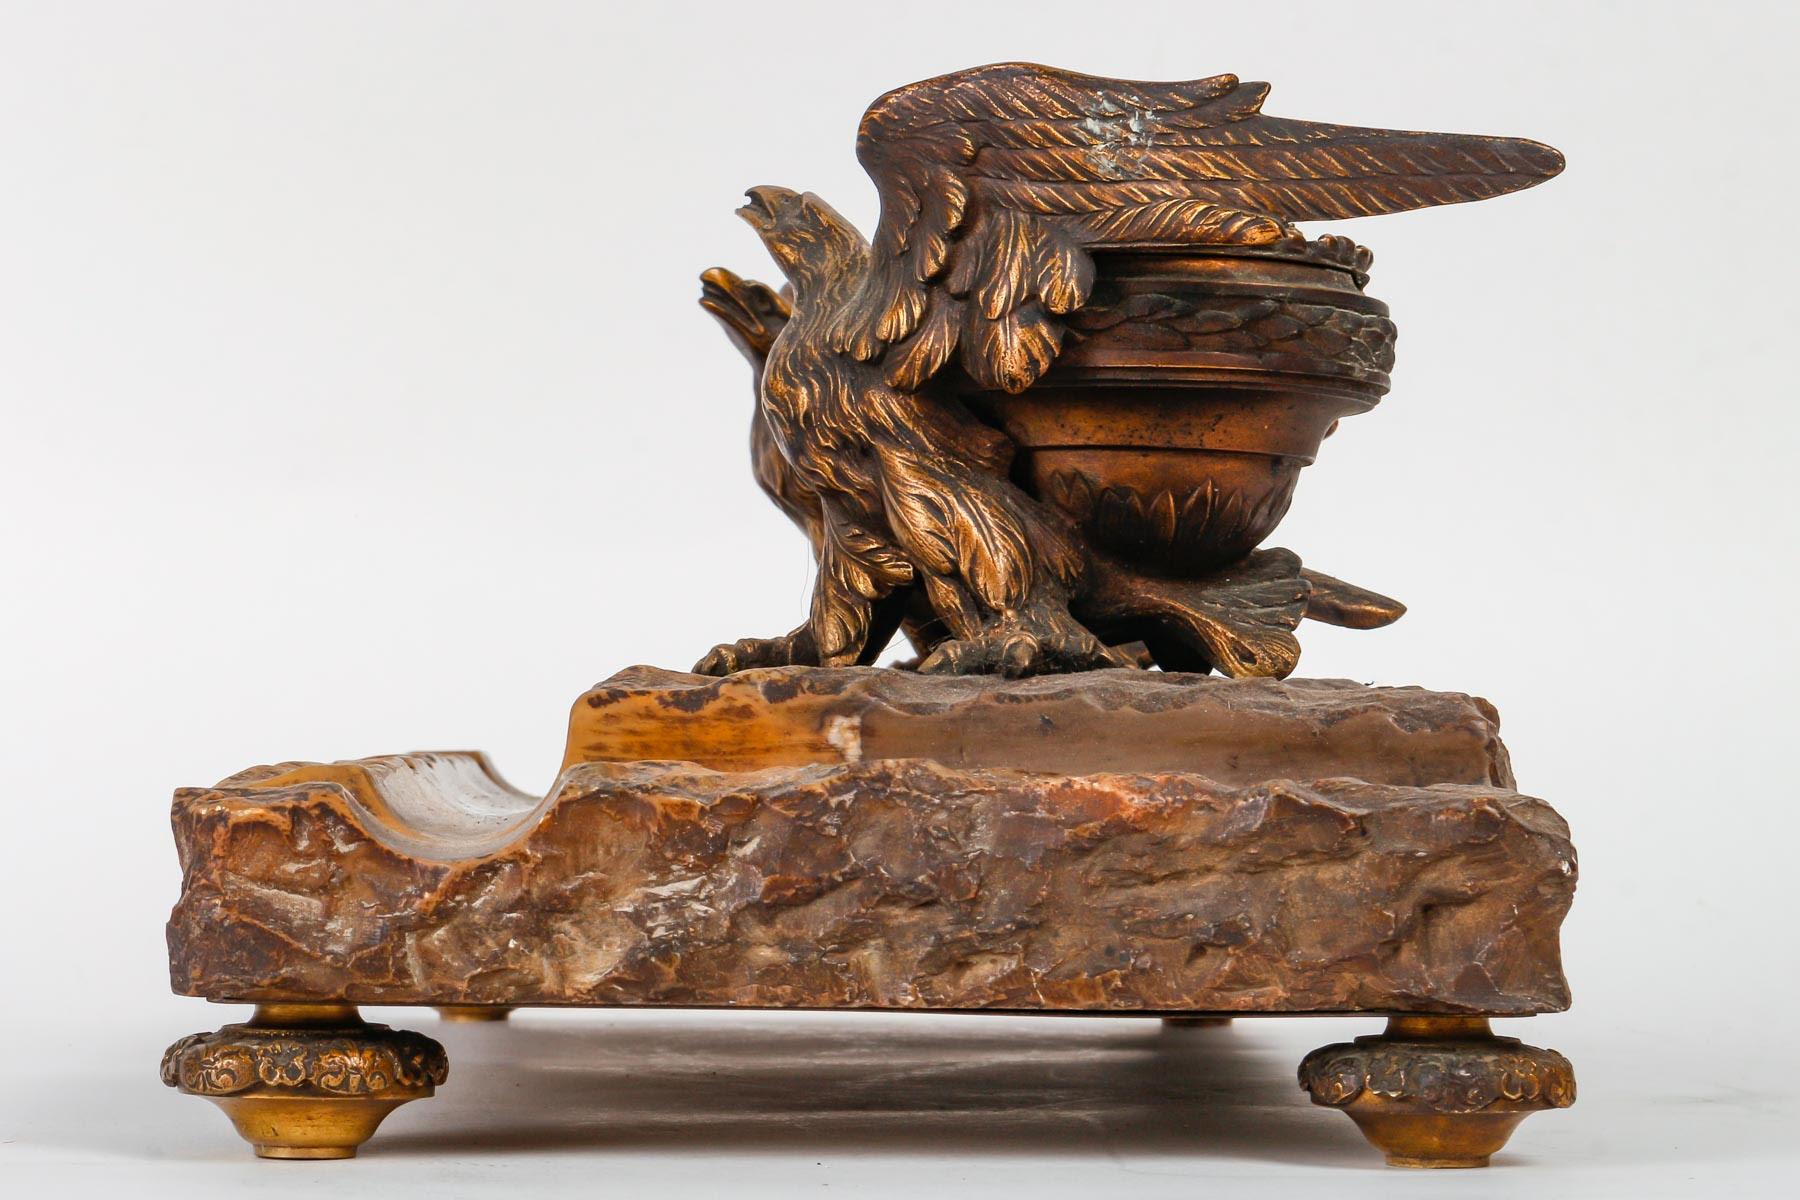 Marble and gilt bronze inkwell from the 19th century, Napoleon III period.

Napoleon III period gilt bronze and marble inkwell decorated with imperial eagles, with porcelain interiors.

Dimensions: h: 16cm, w: 40cm, d: 20cm